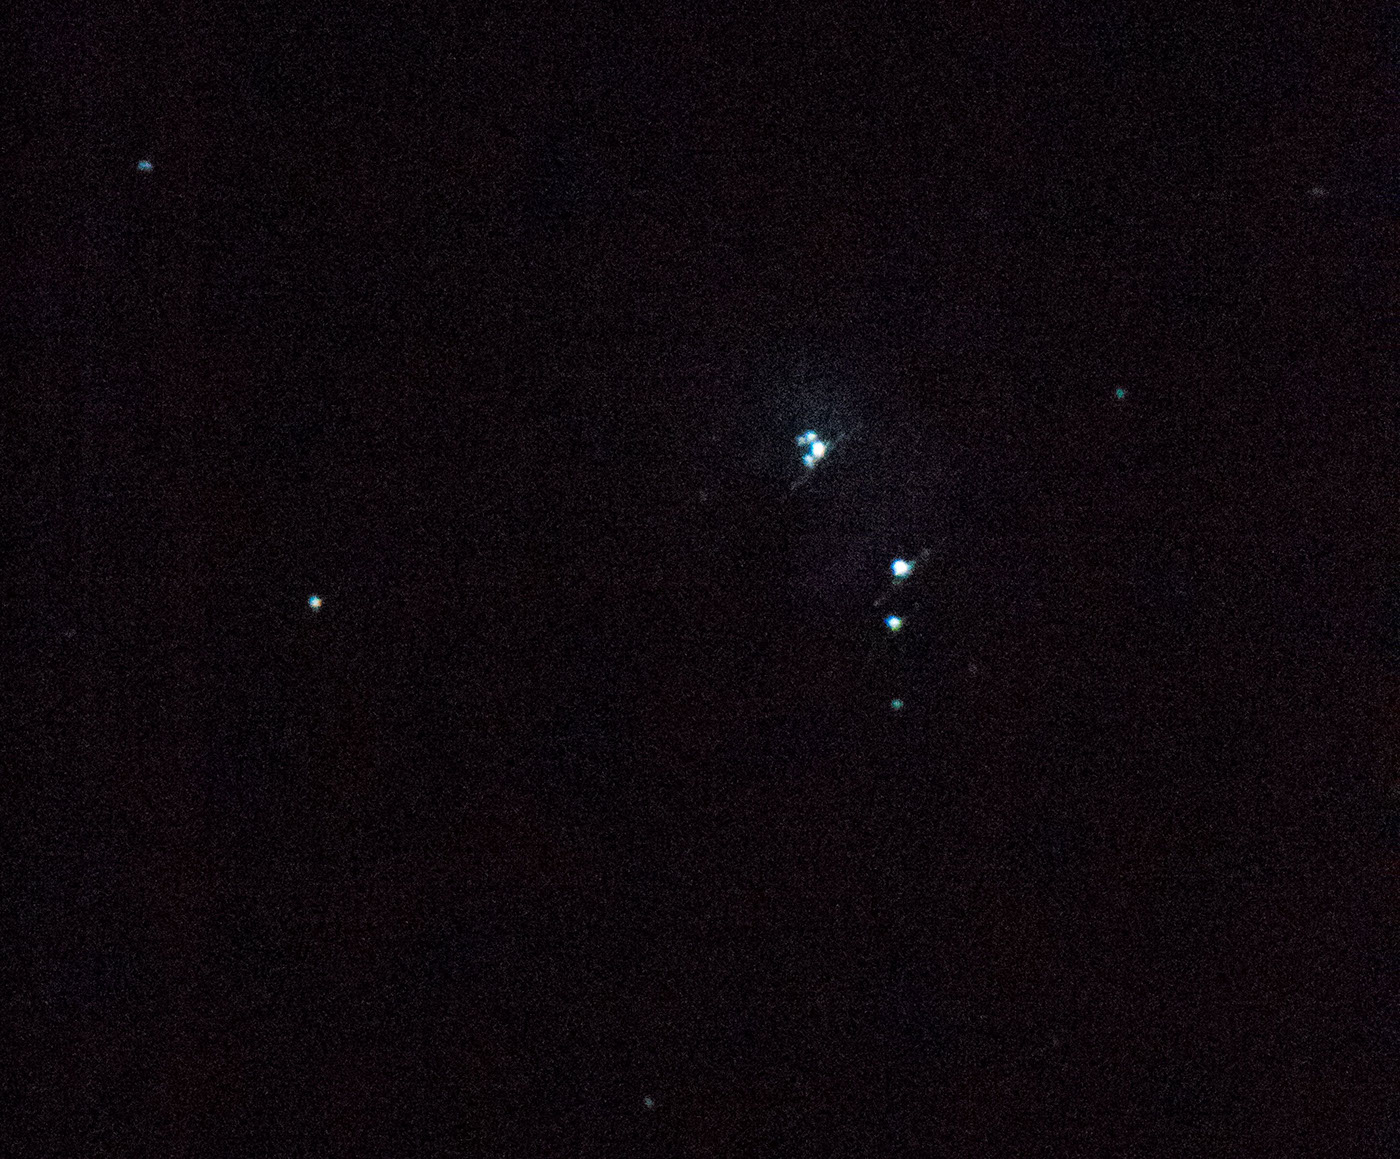 Pentax K-50 1/2SEC ISO 51200.  Trapezium Cluster in the Orion Nebula.